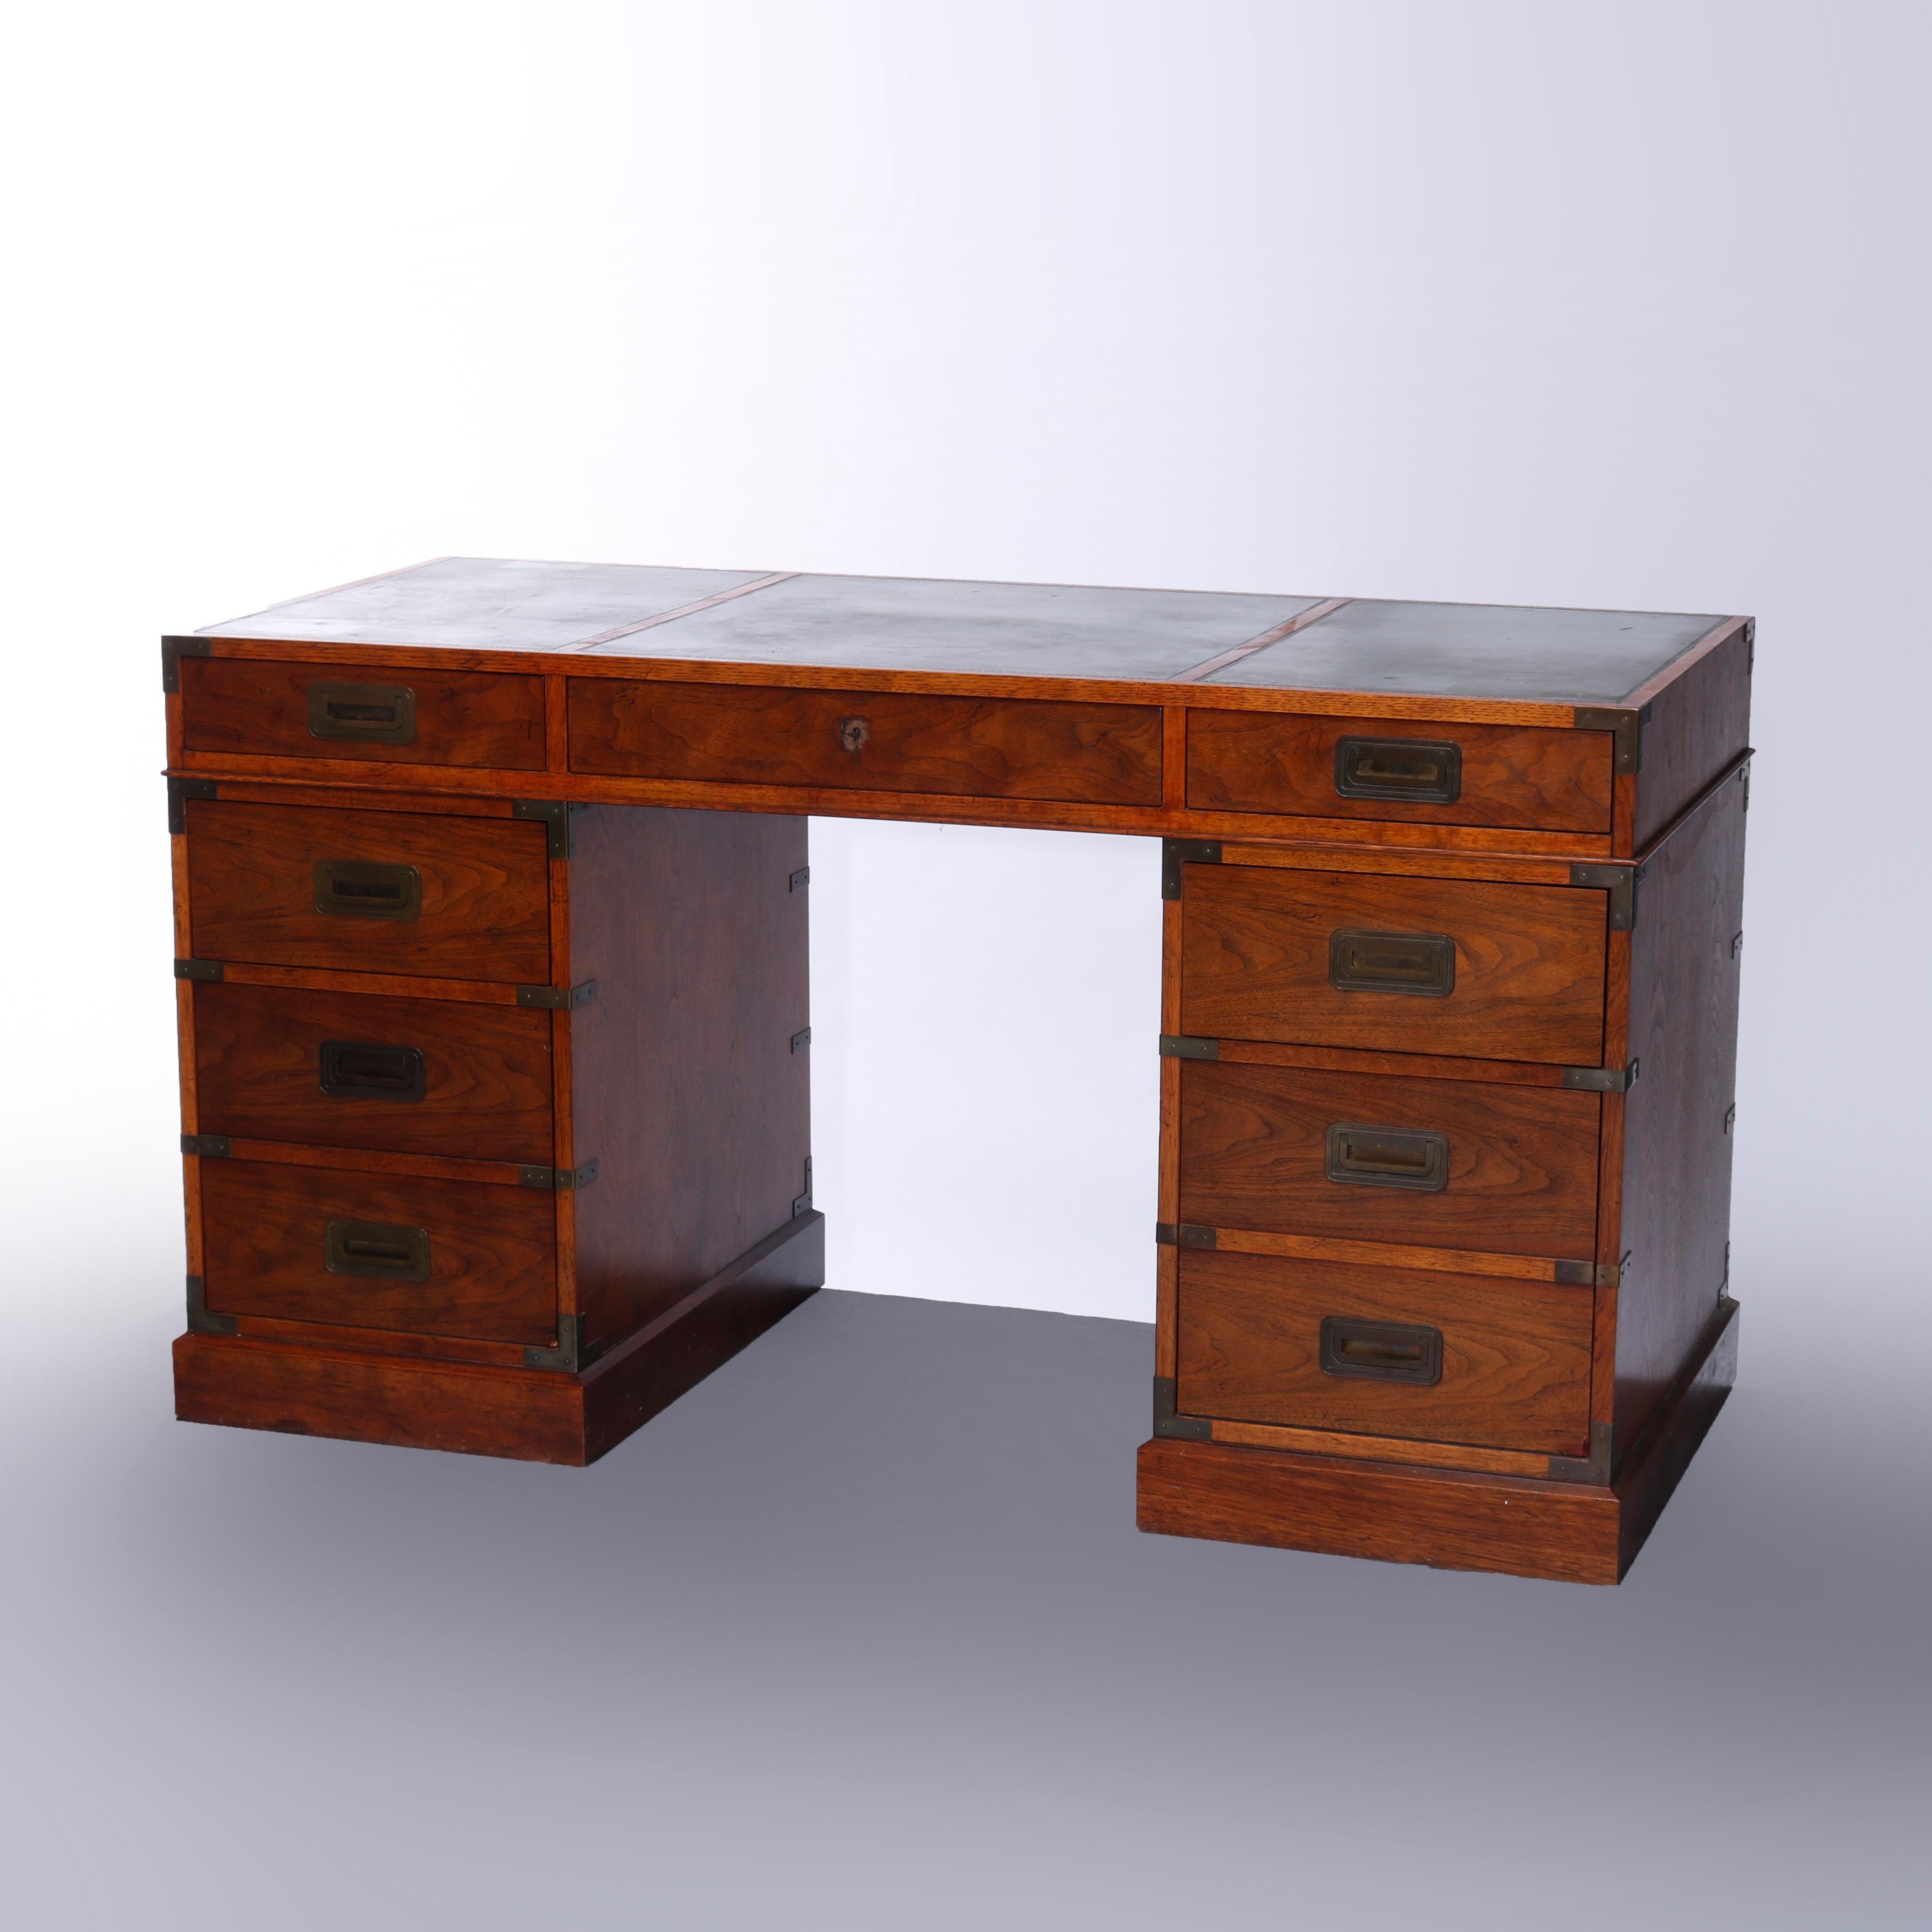 A writing desk by Baker Furniture Milling Road, offers oak construction with segmented writing surface over central single drawer flanked by drawer towers, maker mark branded on drawer interior as photographed, 20th century

Measures - 30''H x